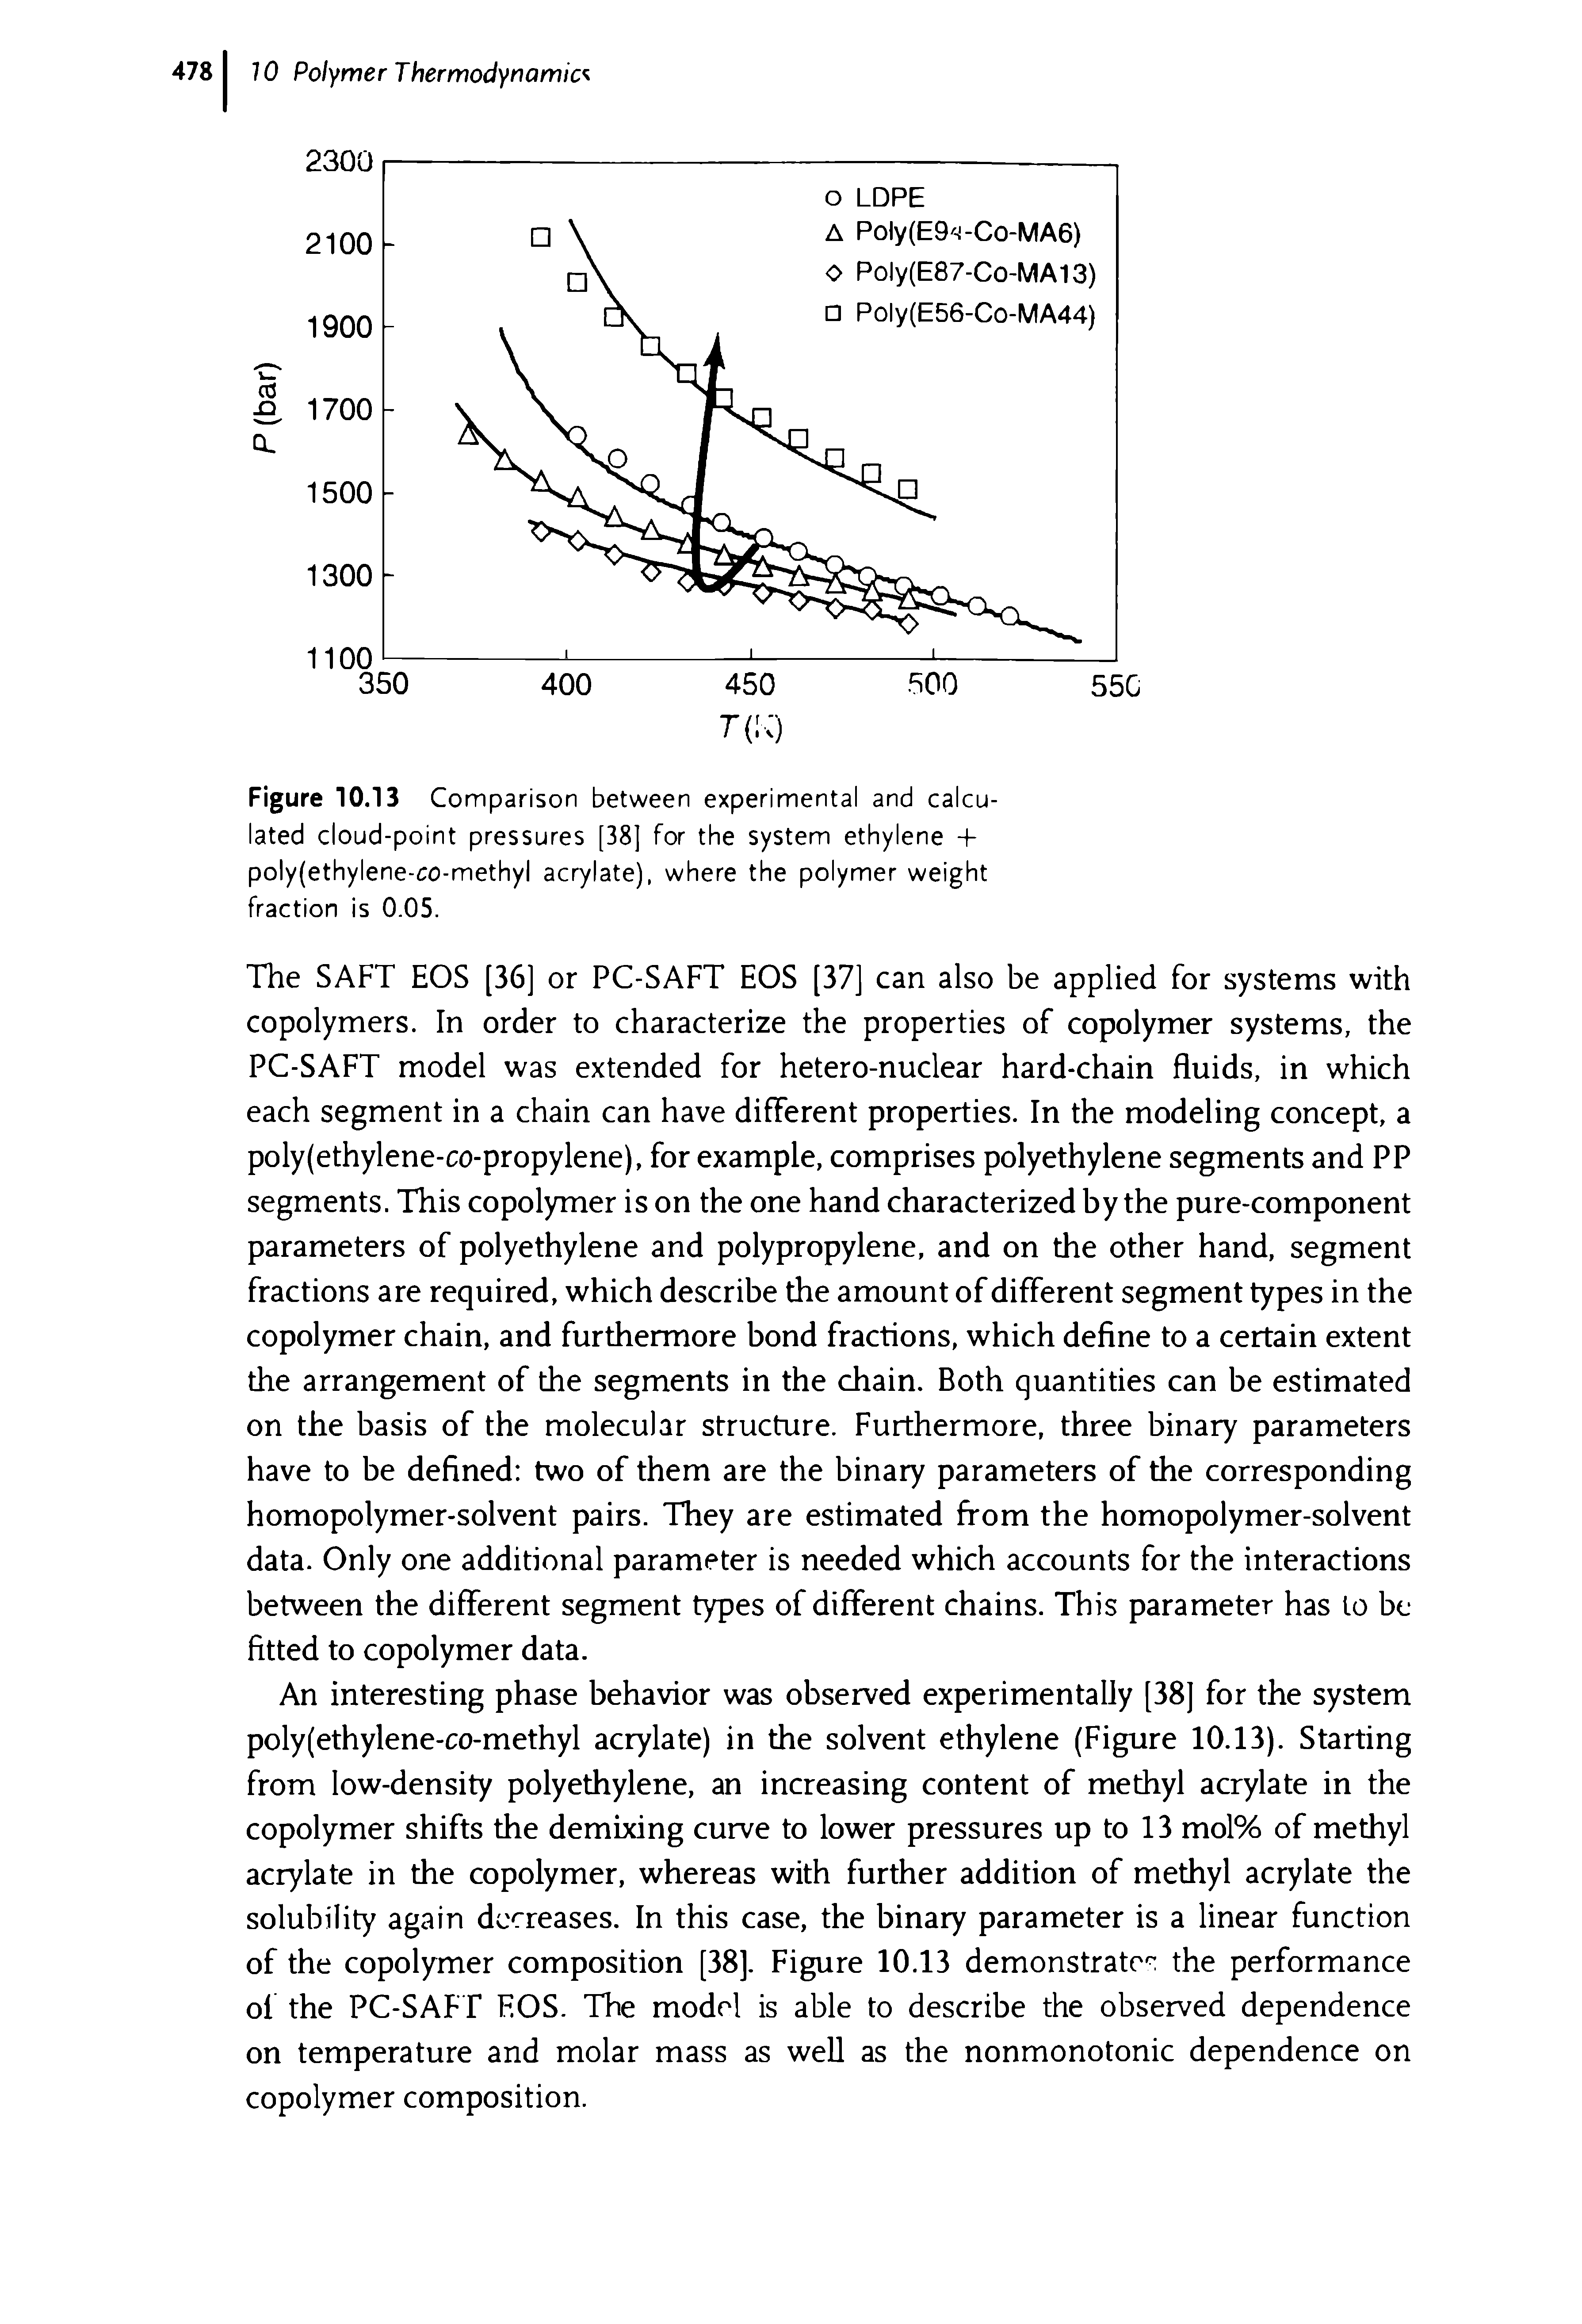 Figure 10.13 Comparison between experimental and calculated cloud-point pressures [38] for the system ethylene -f poly(ethylene-co-methyl acrylate), where the polymer weight fraction is 0.05.